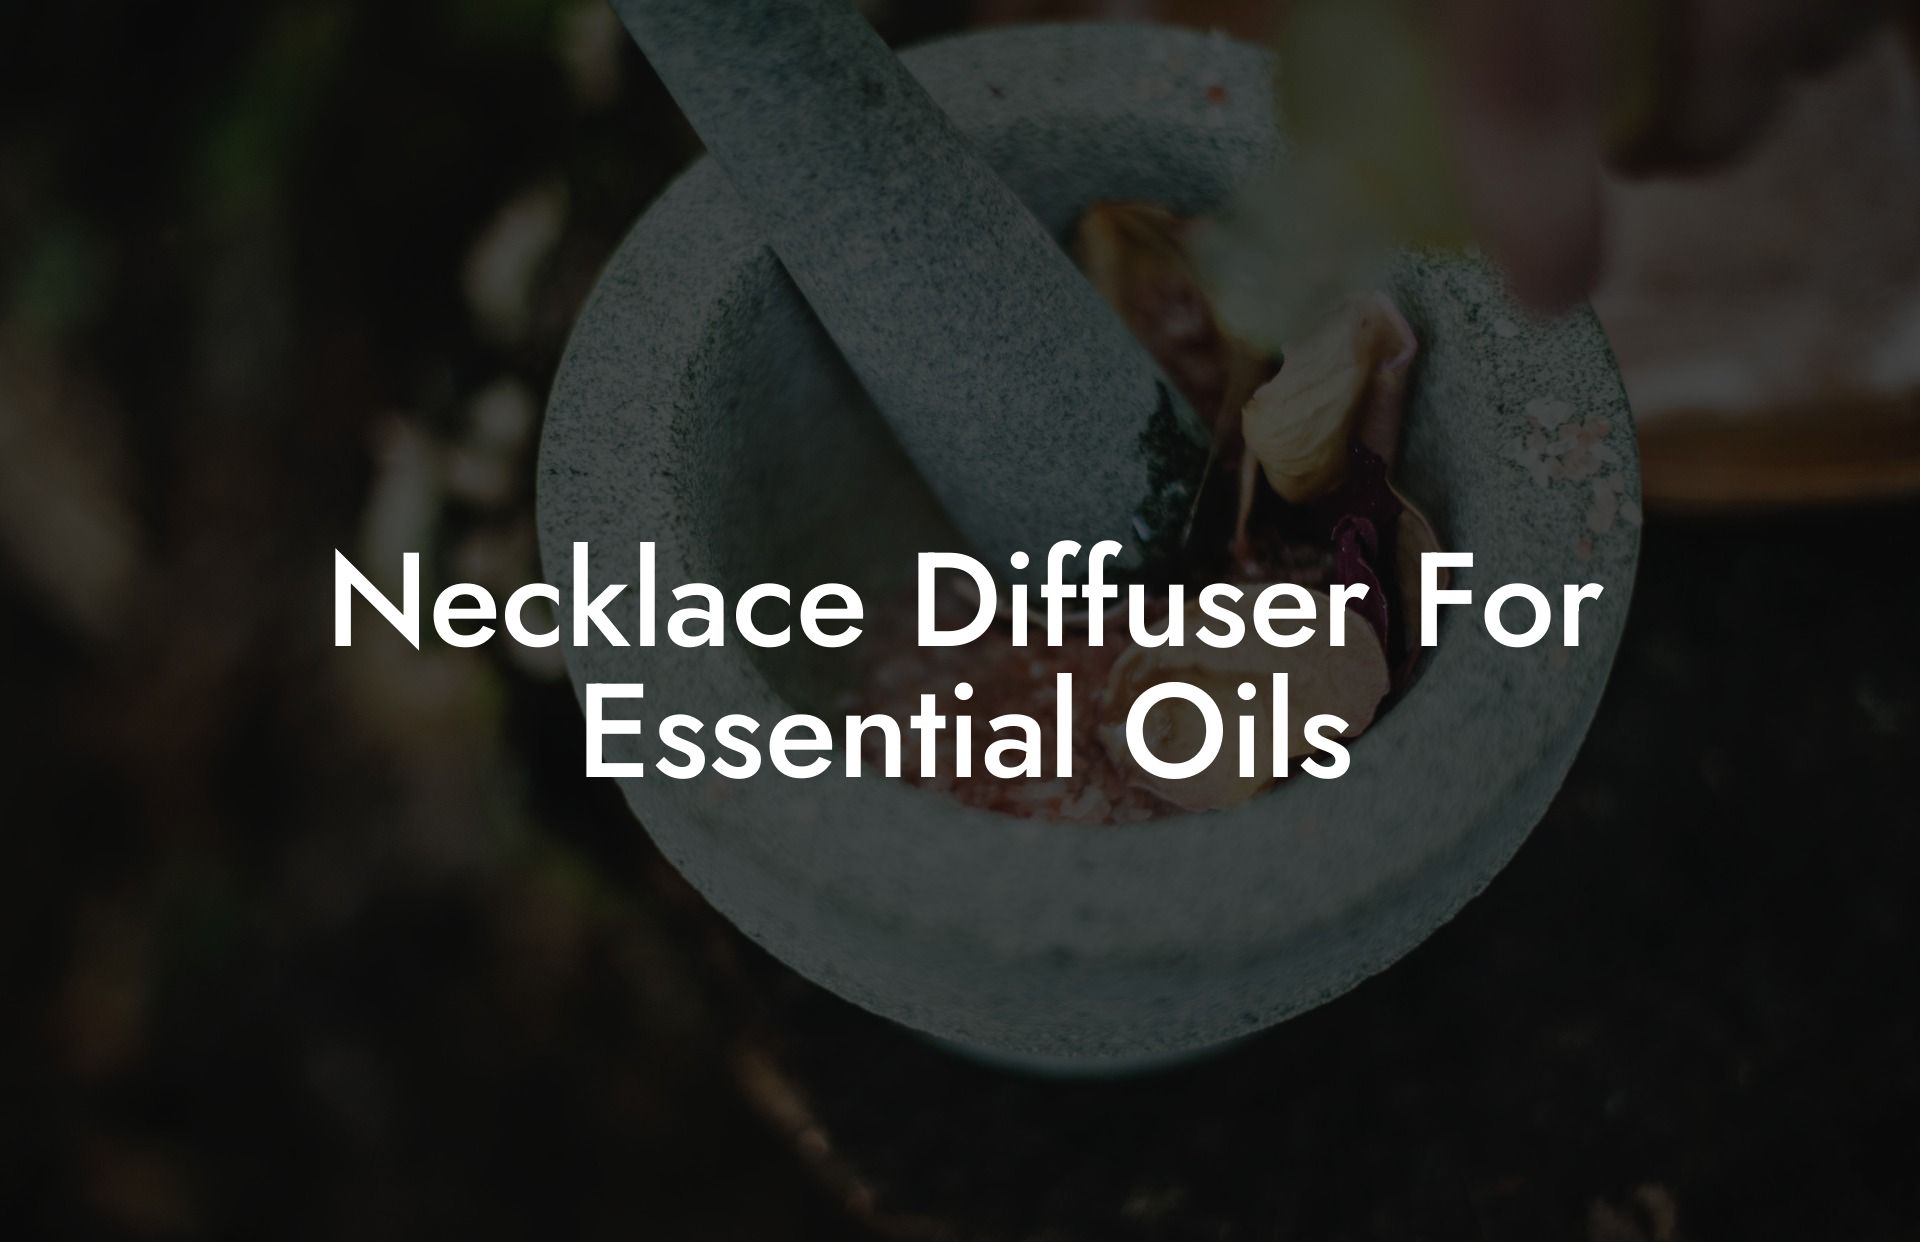 Necklace Diffuser For Essential Oils